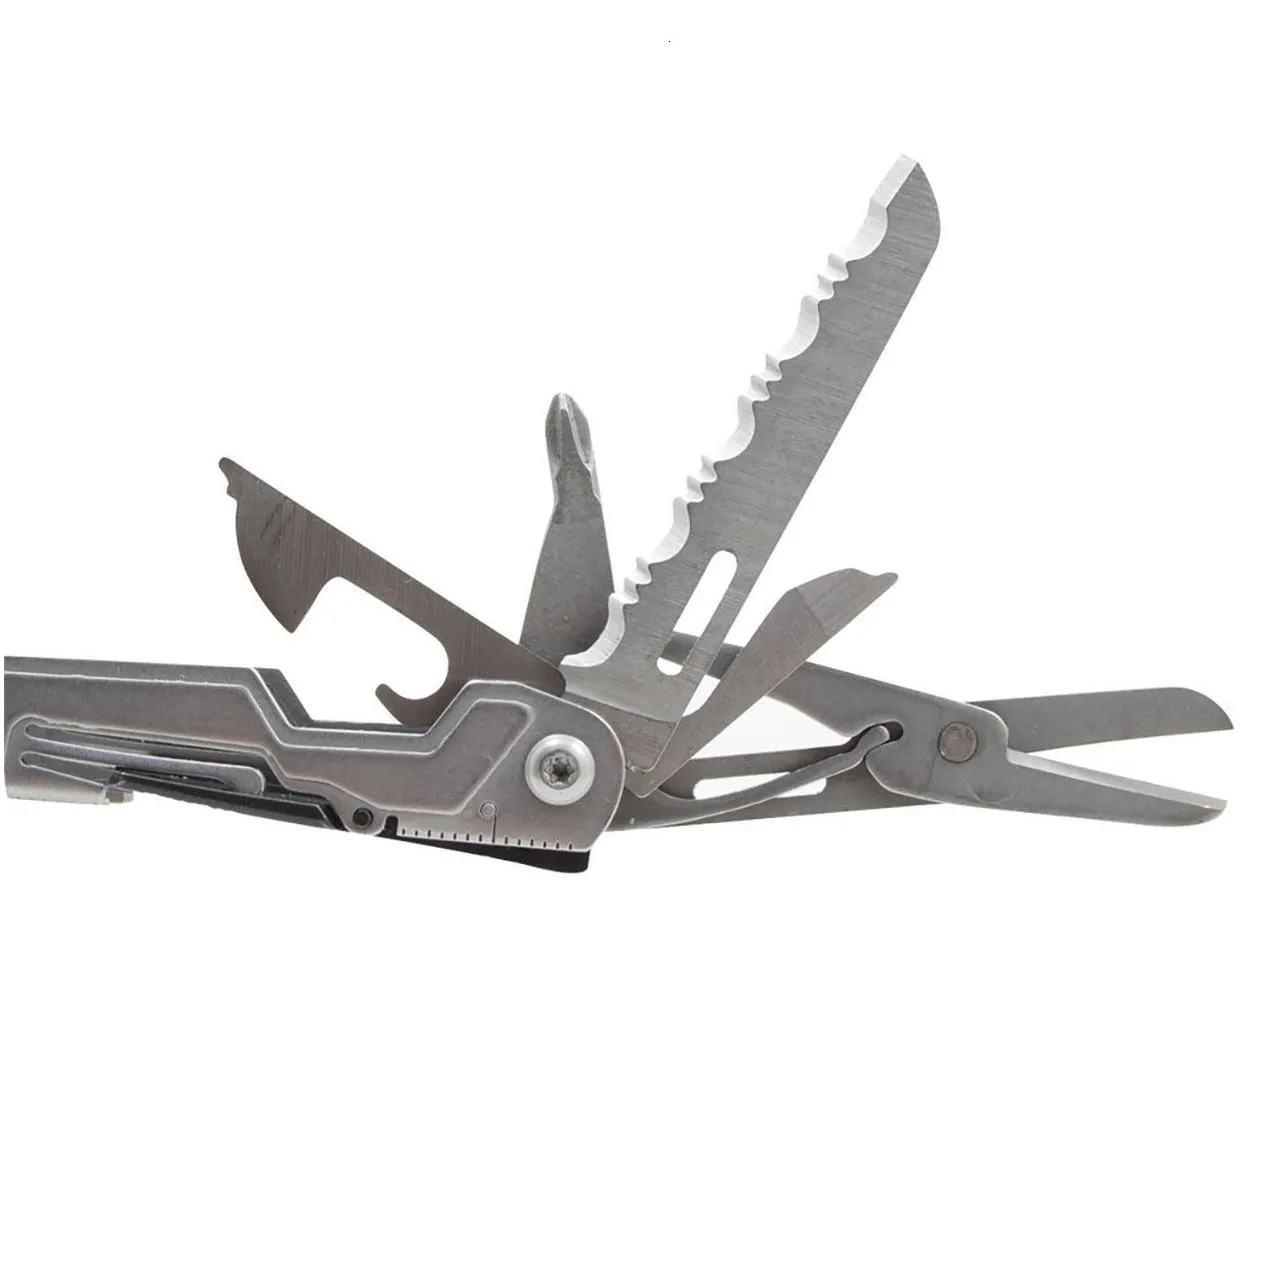 Pliers Sog Pp1001 Mini Mti Function Tool Folding Outdoor Cam Edc Equipment 230609 Drop Delivery Dhox7